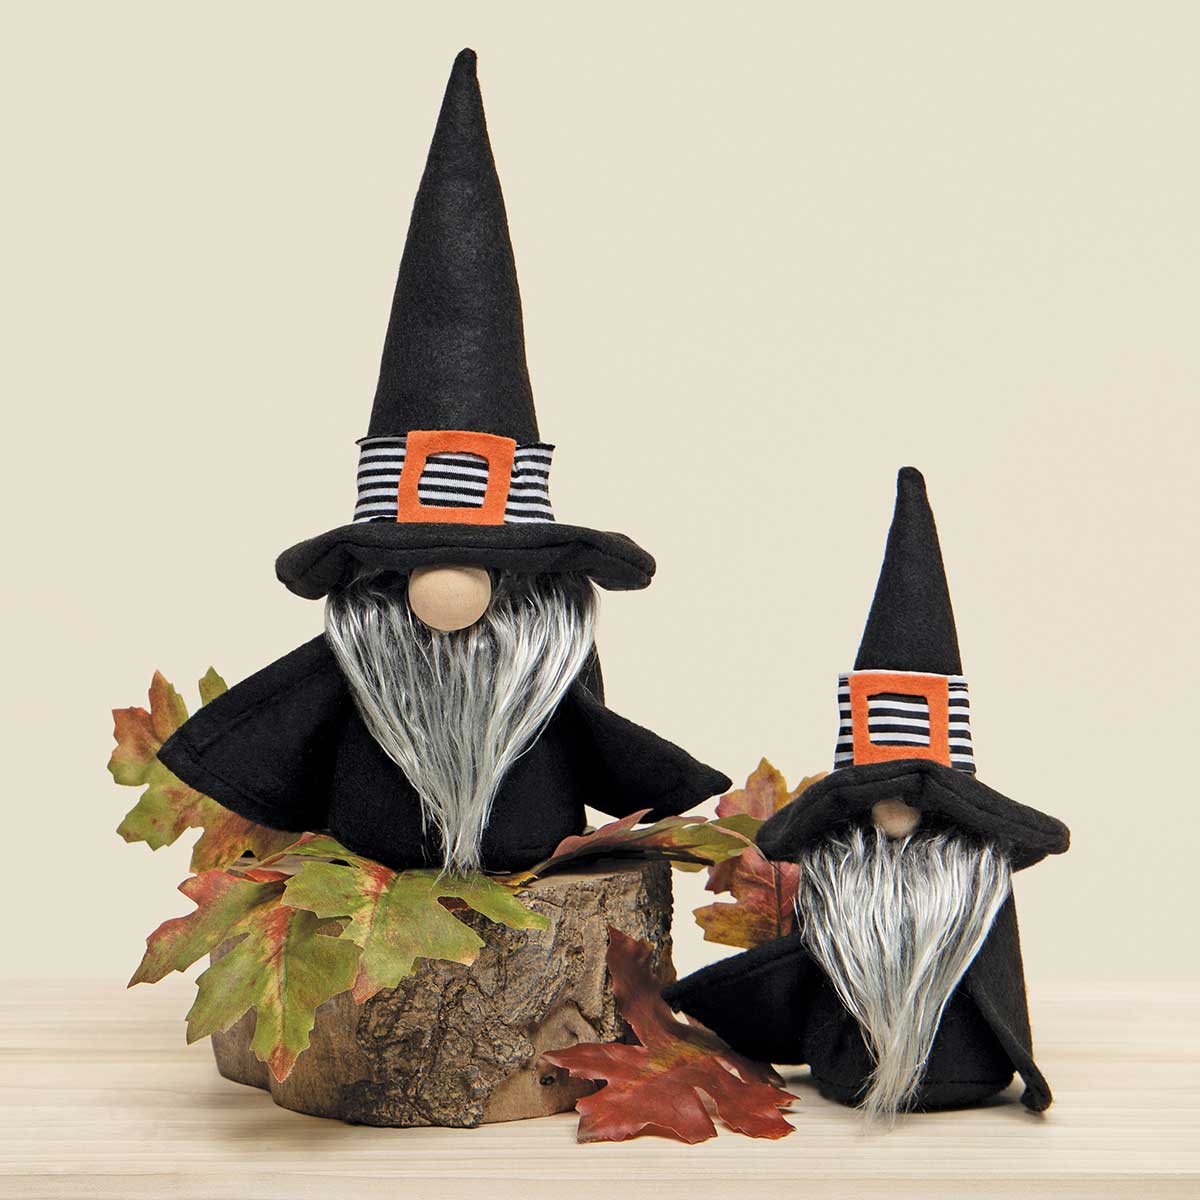 !WILMA WITCH GNOME BLACK/WHITE WITH WOOD NOSE, GREY